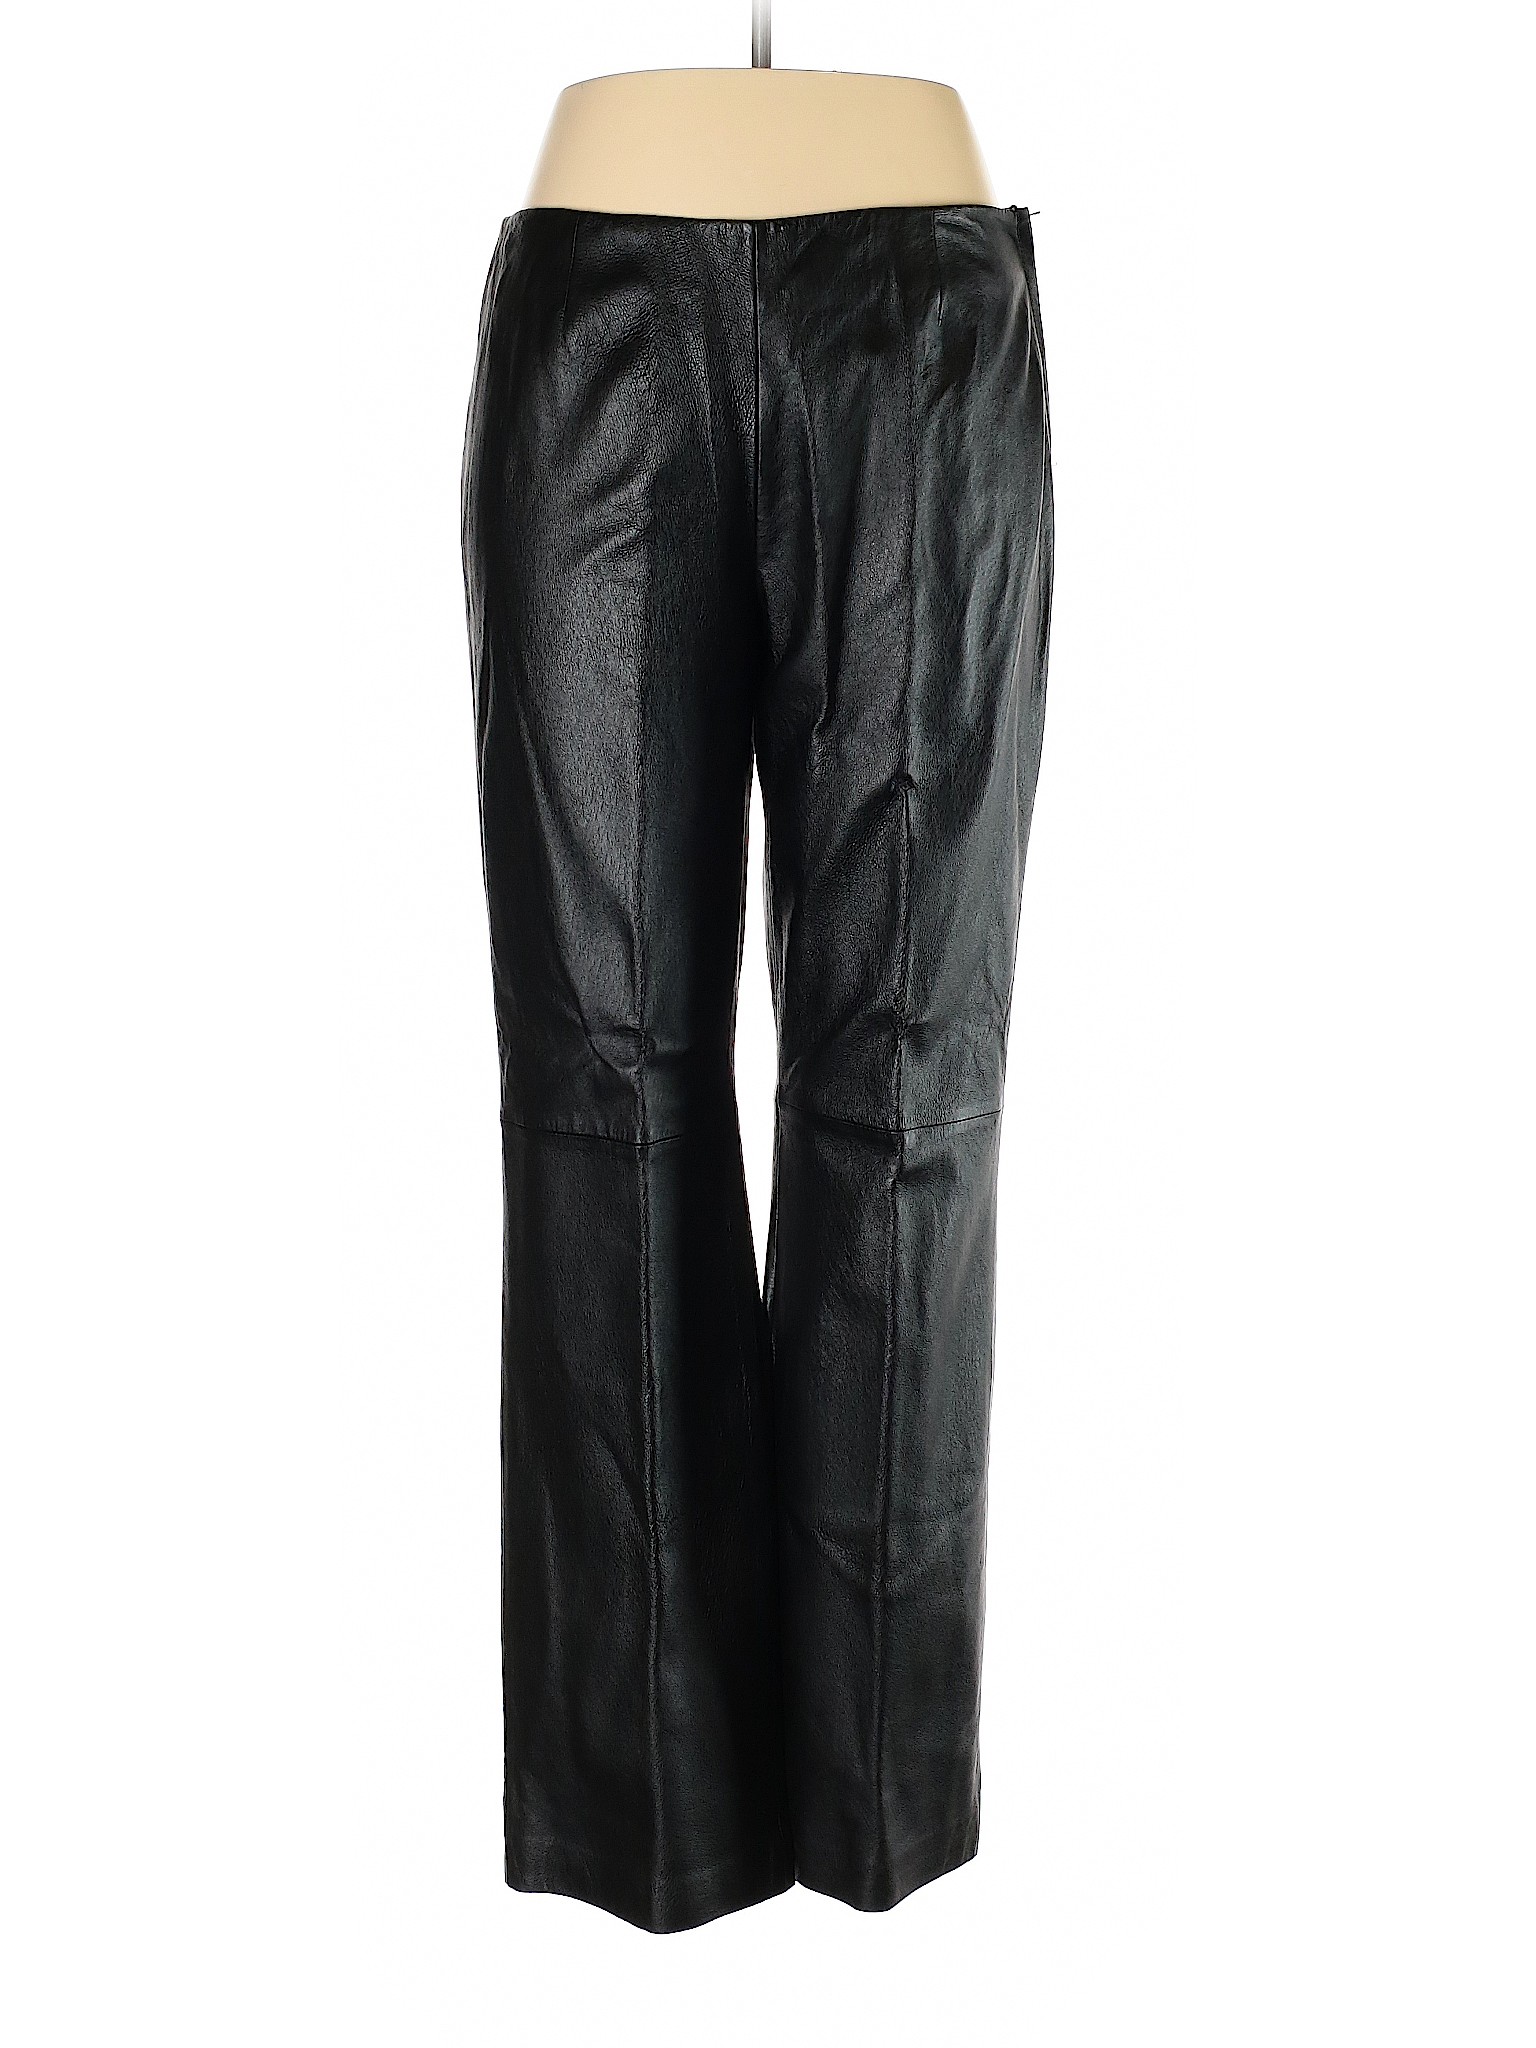 Newport News 100% Leather Solid Black Leather Pants Size 14 - 77% off ...